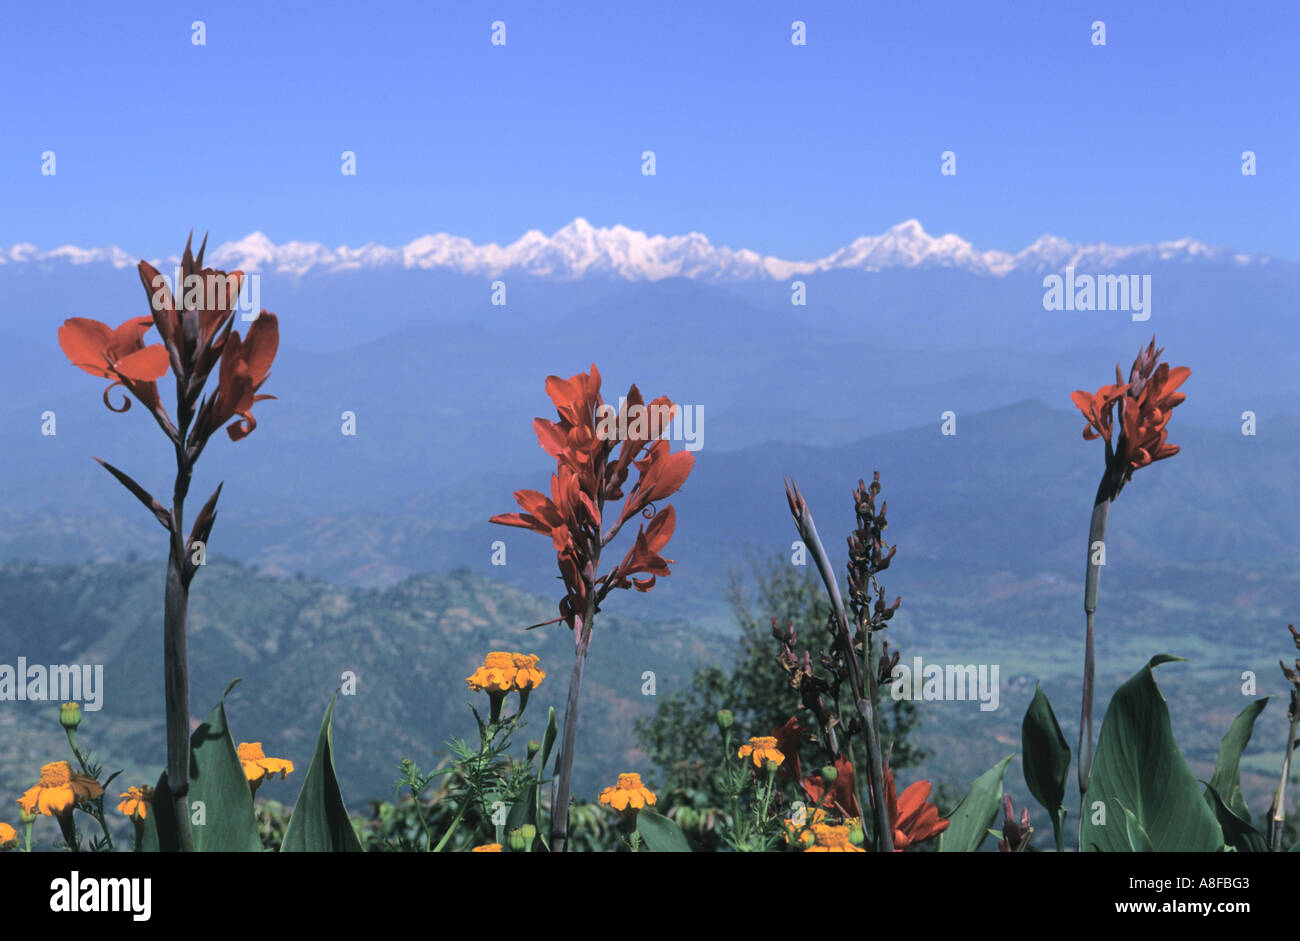 Rolwaling Himal and Canna indica flowers Tagetes marigold in foreground Kathmandu valley Nepal Stock Photo